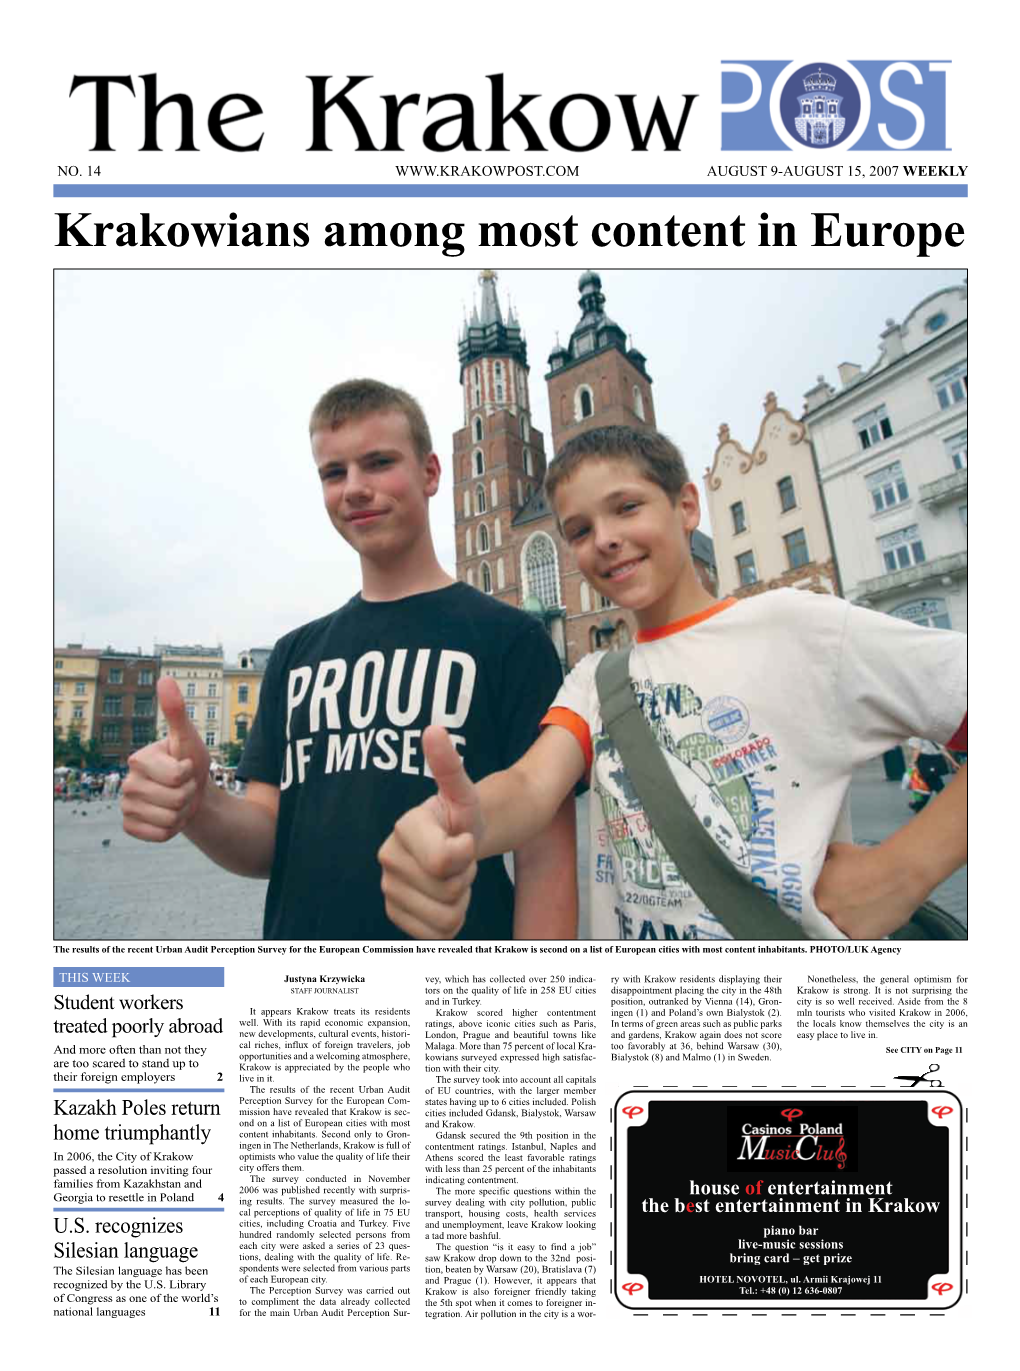 Krakowians Among Most Content in Europe